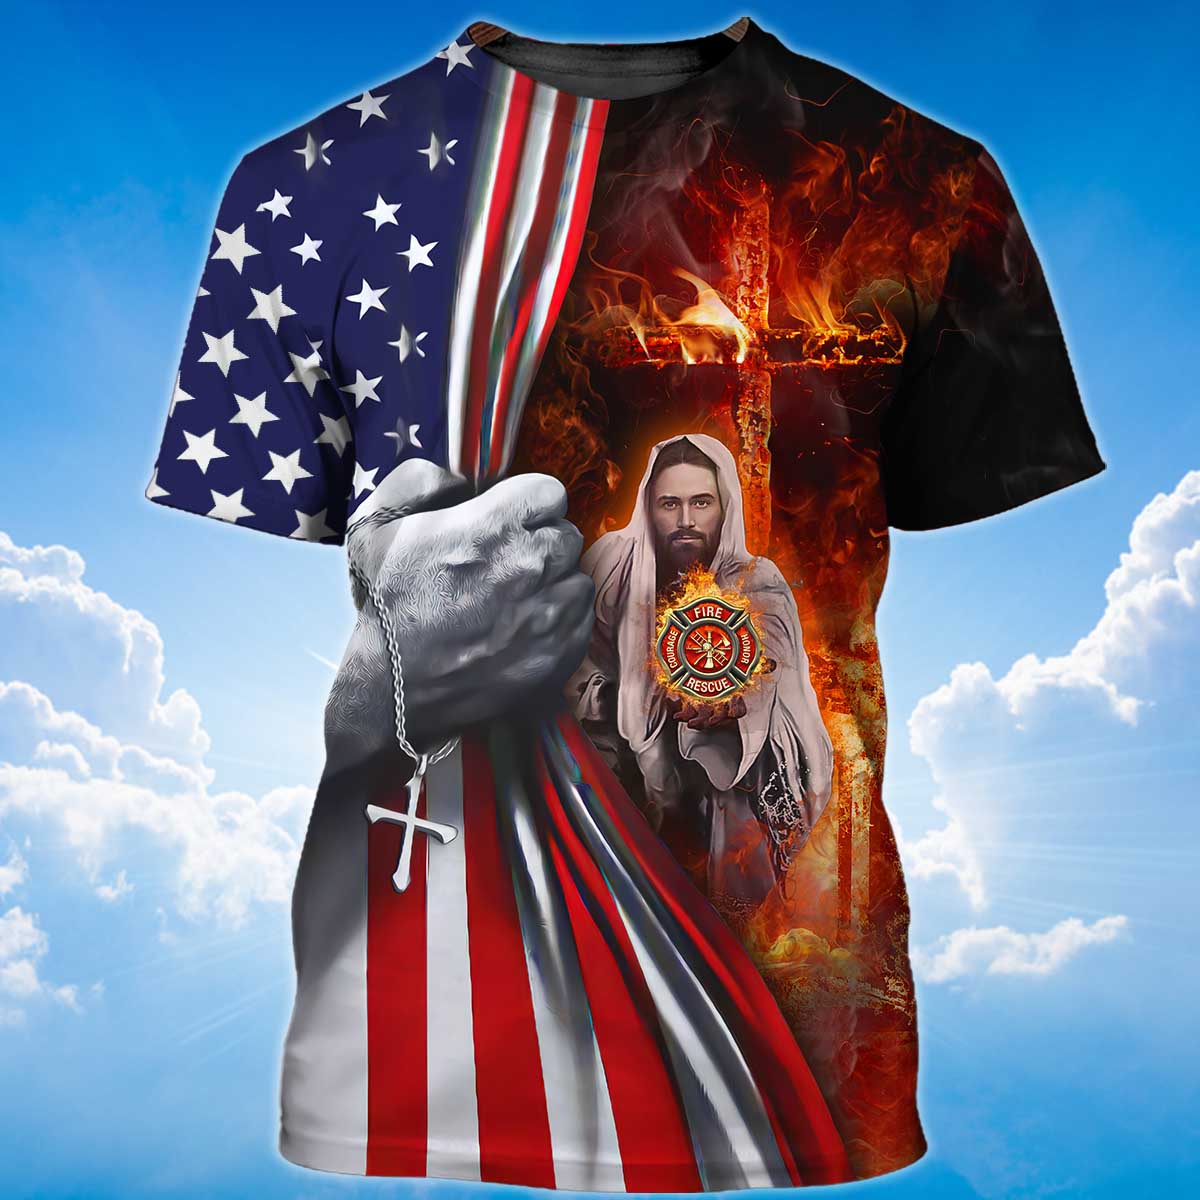 Jesus In The Flames T Shirt Patriot Gift Memorial 11 September Shirts